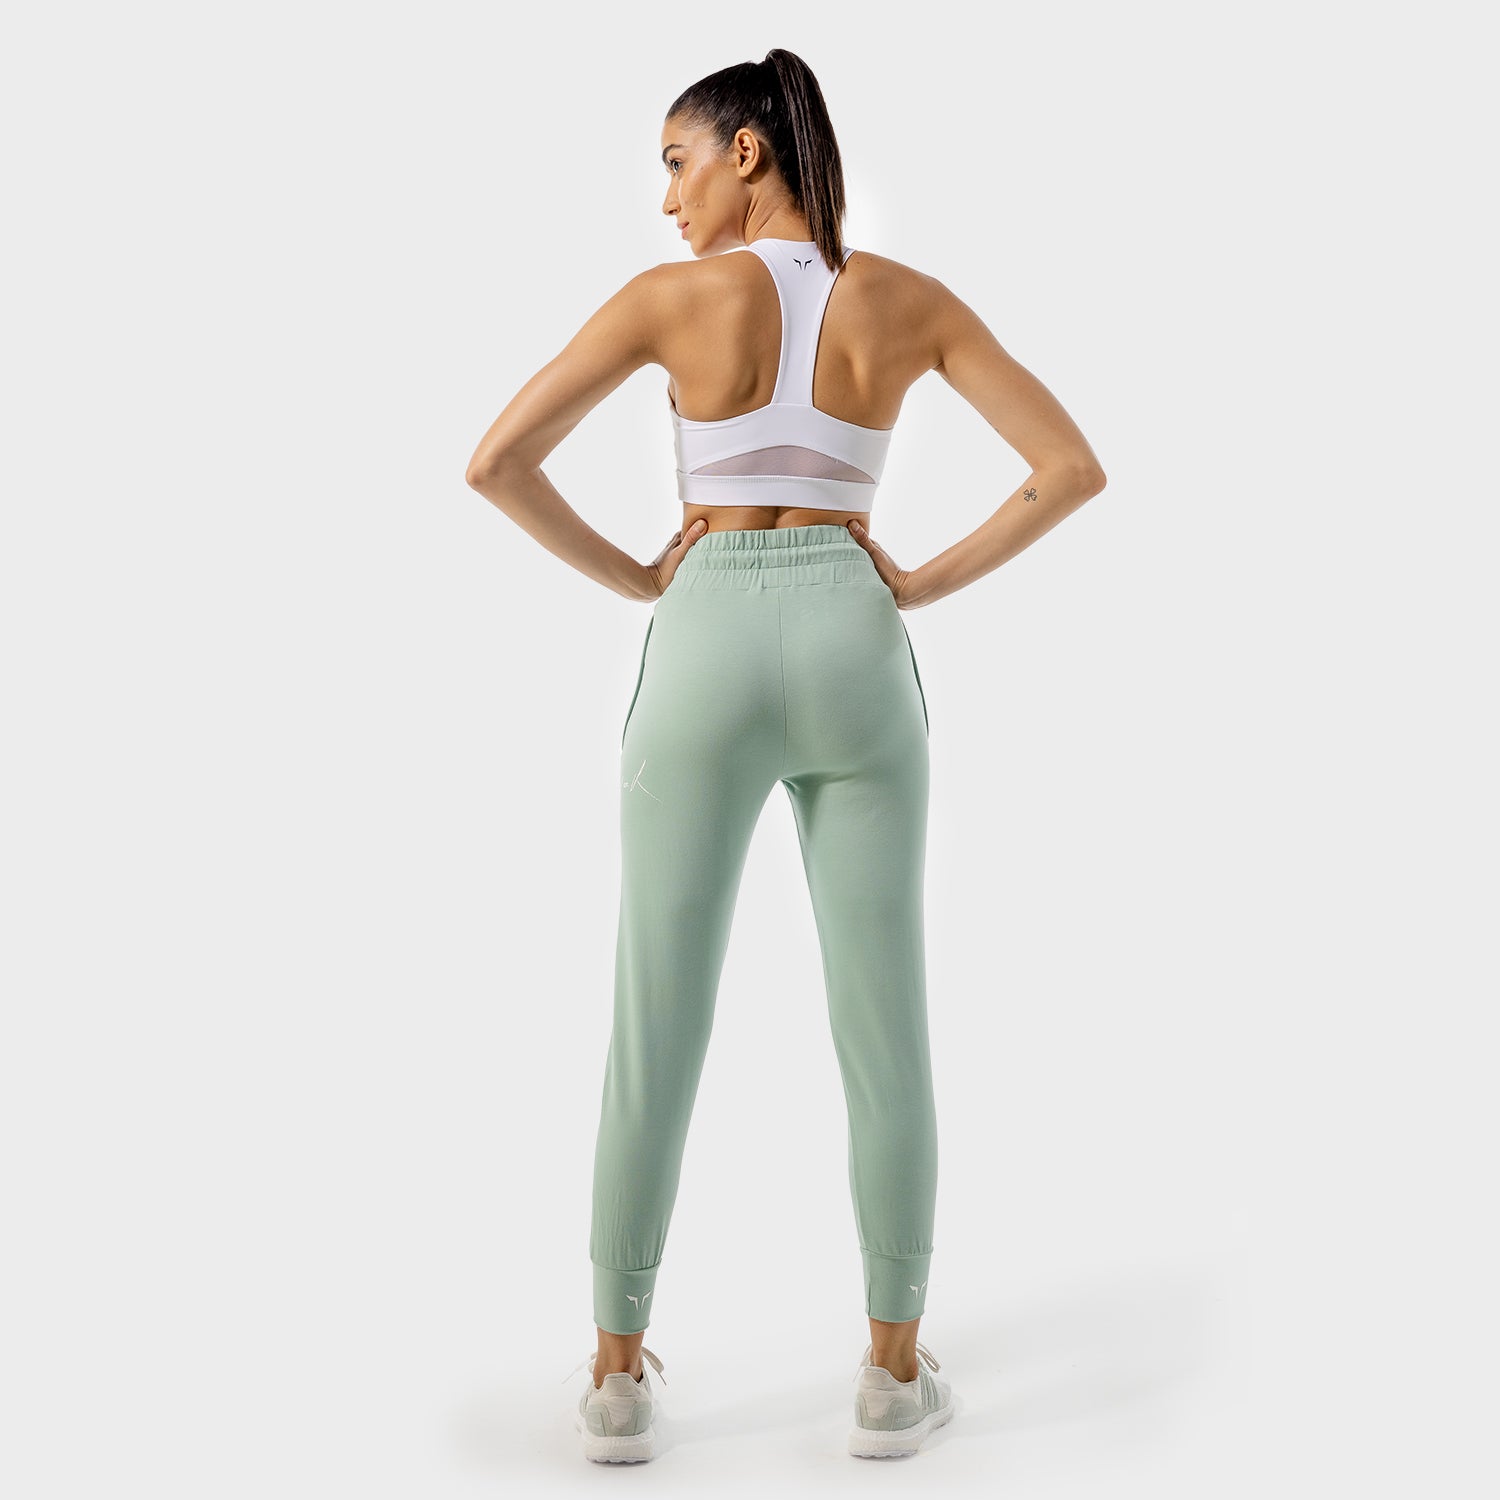 squatwolf-gym-pants-for-women-vibe-joggers-duck-egg-blue-workout-clothes